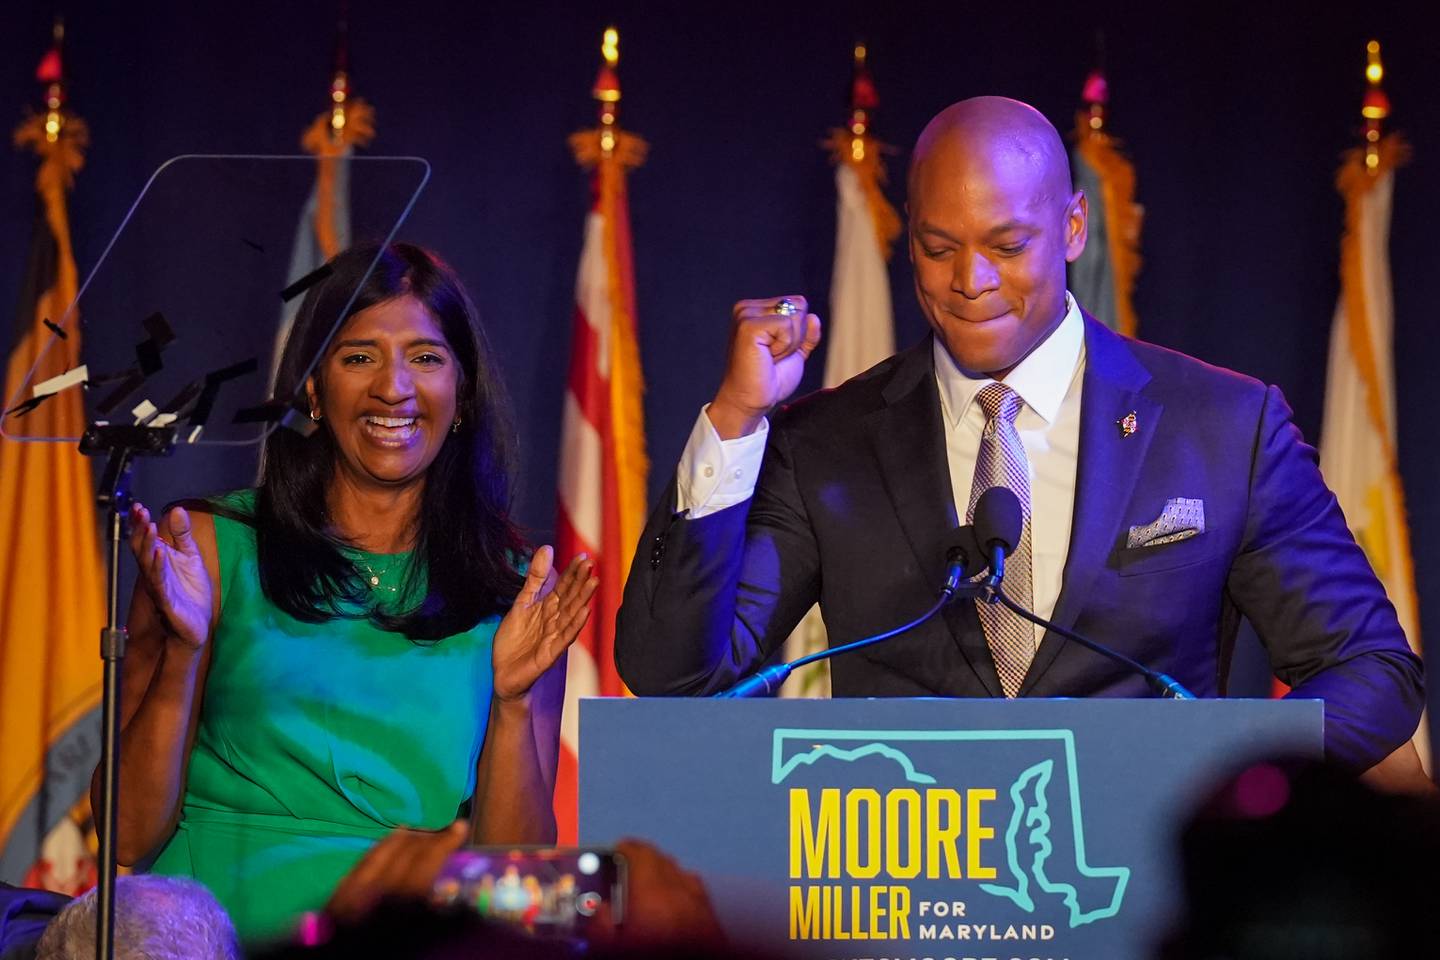 Democratic gubernatorial candidate Wes Moore celebrates with his running mate, Aruna Miller, after declaring victory at an Election Night event at the Baltimore Marriott Waterfront on Tuesday, November 8. Democratic candidates Wes Moore, Aruna Miller, Chris Van Hollen, Anthony Brown and Brooke Lierman held a combined event beginning at 8 p.m. as the polls closed.